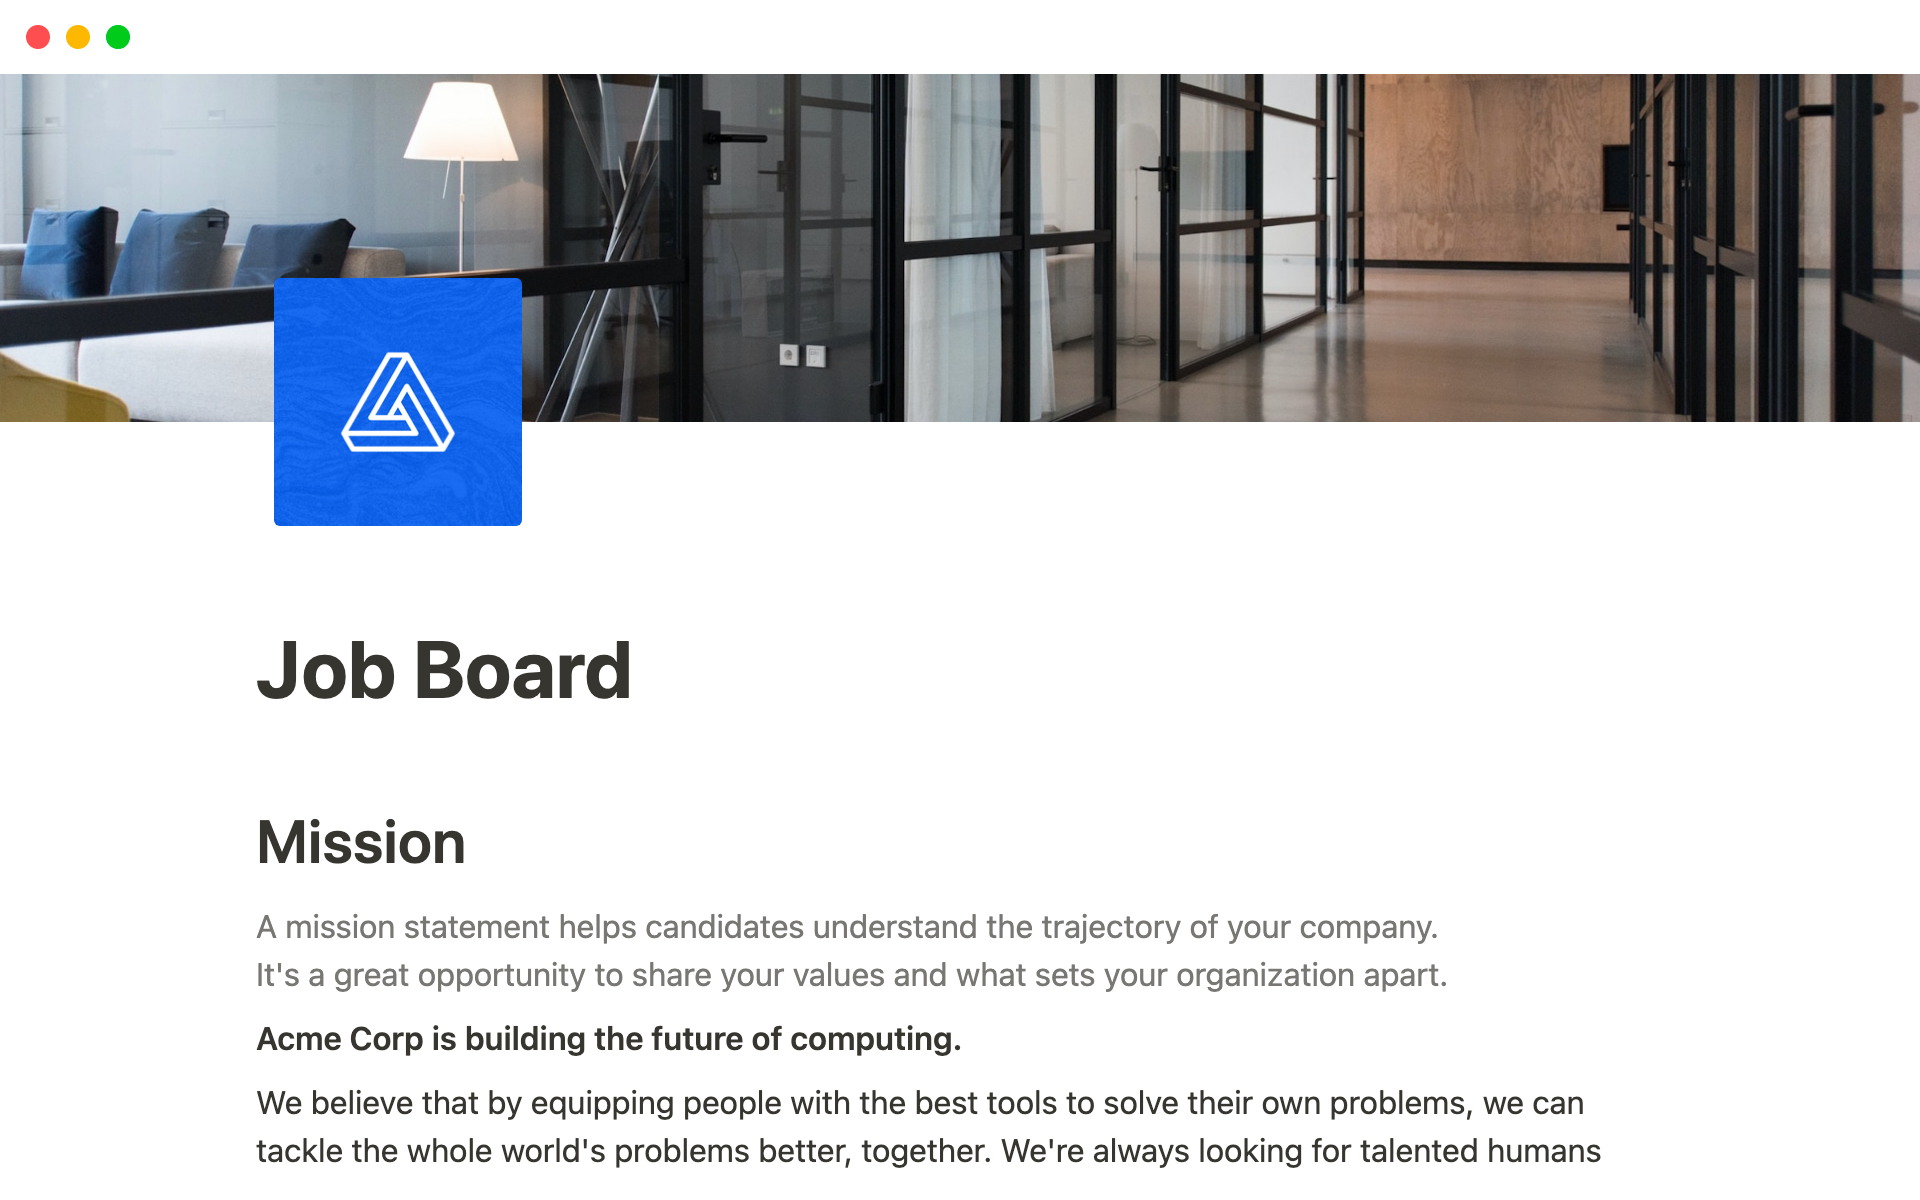 The desktop image for the Job board template